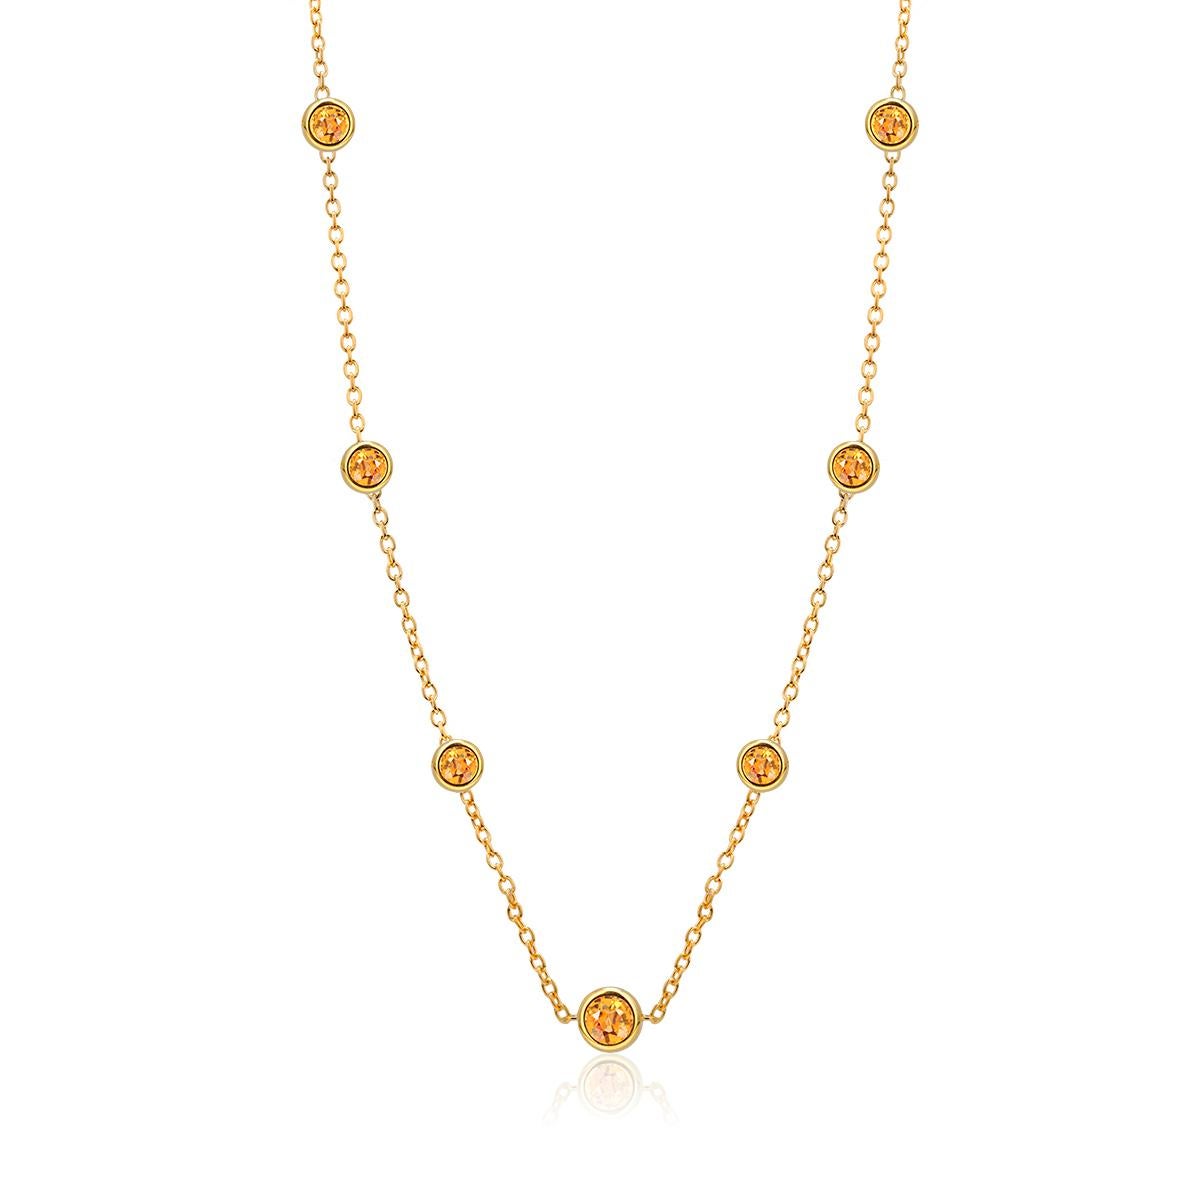 Modern Seven Natural Yellow Sapphires Bezel Necklace Sterling Silver Yellow Gold-Plated